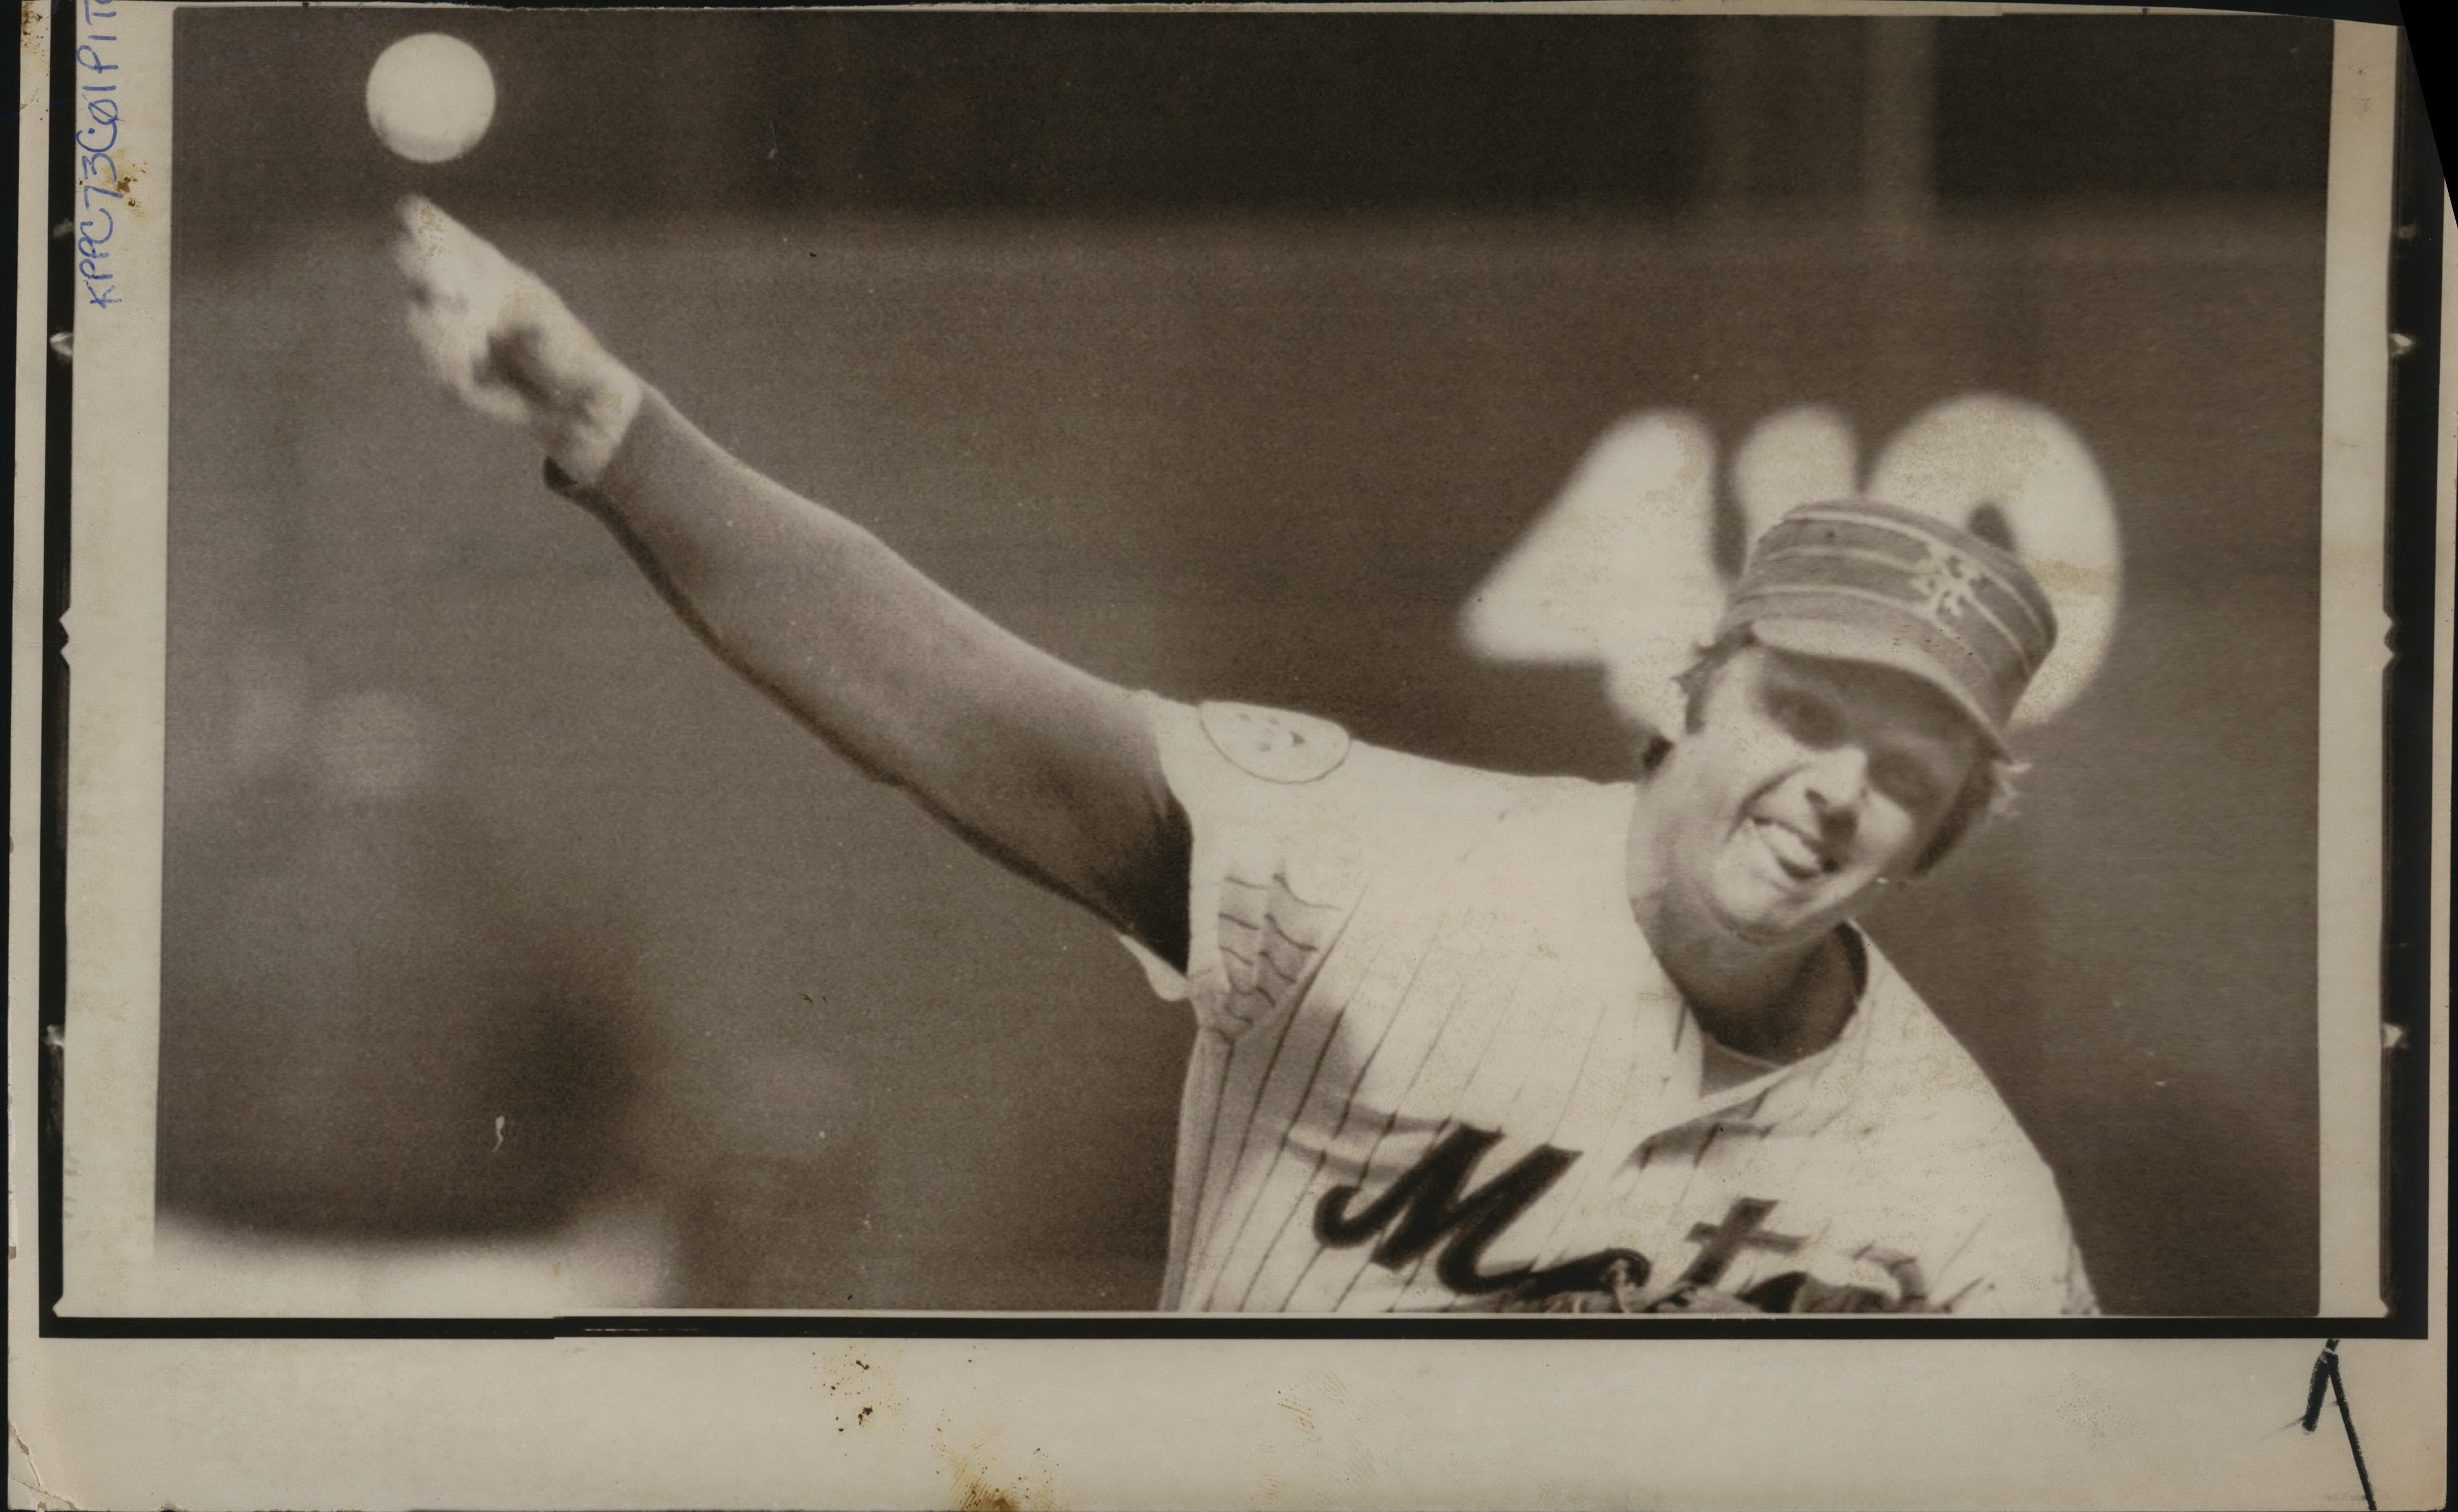 Mets legend Tom Seaver's life and career: The great moments